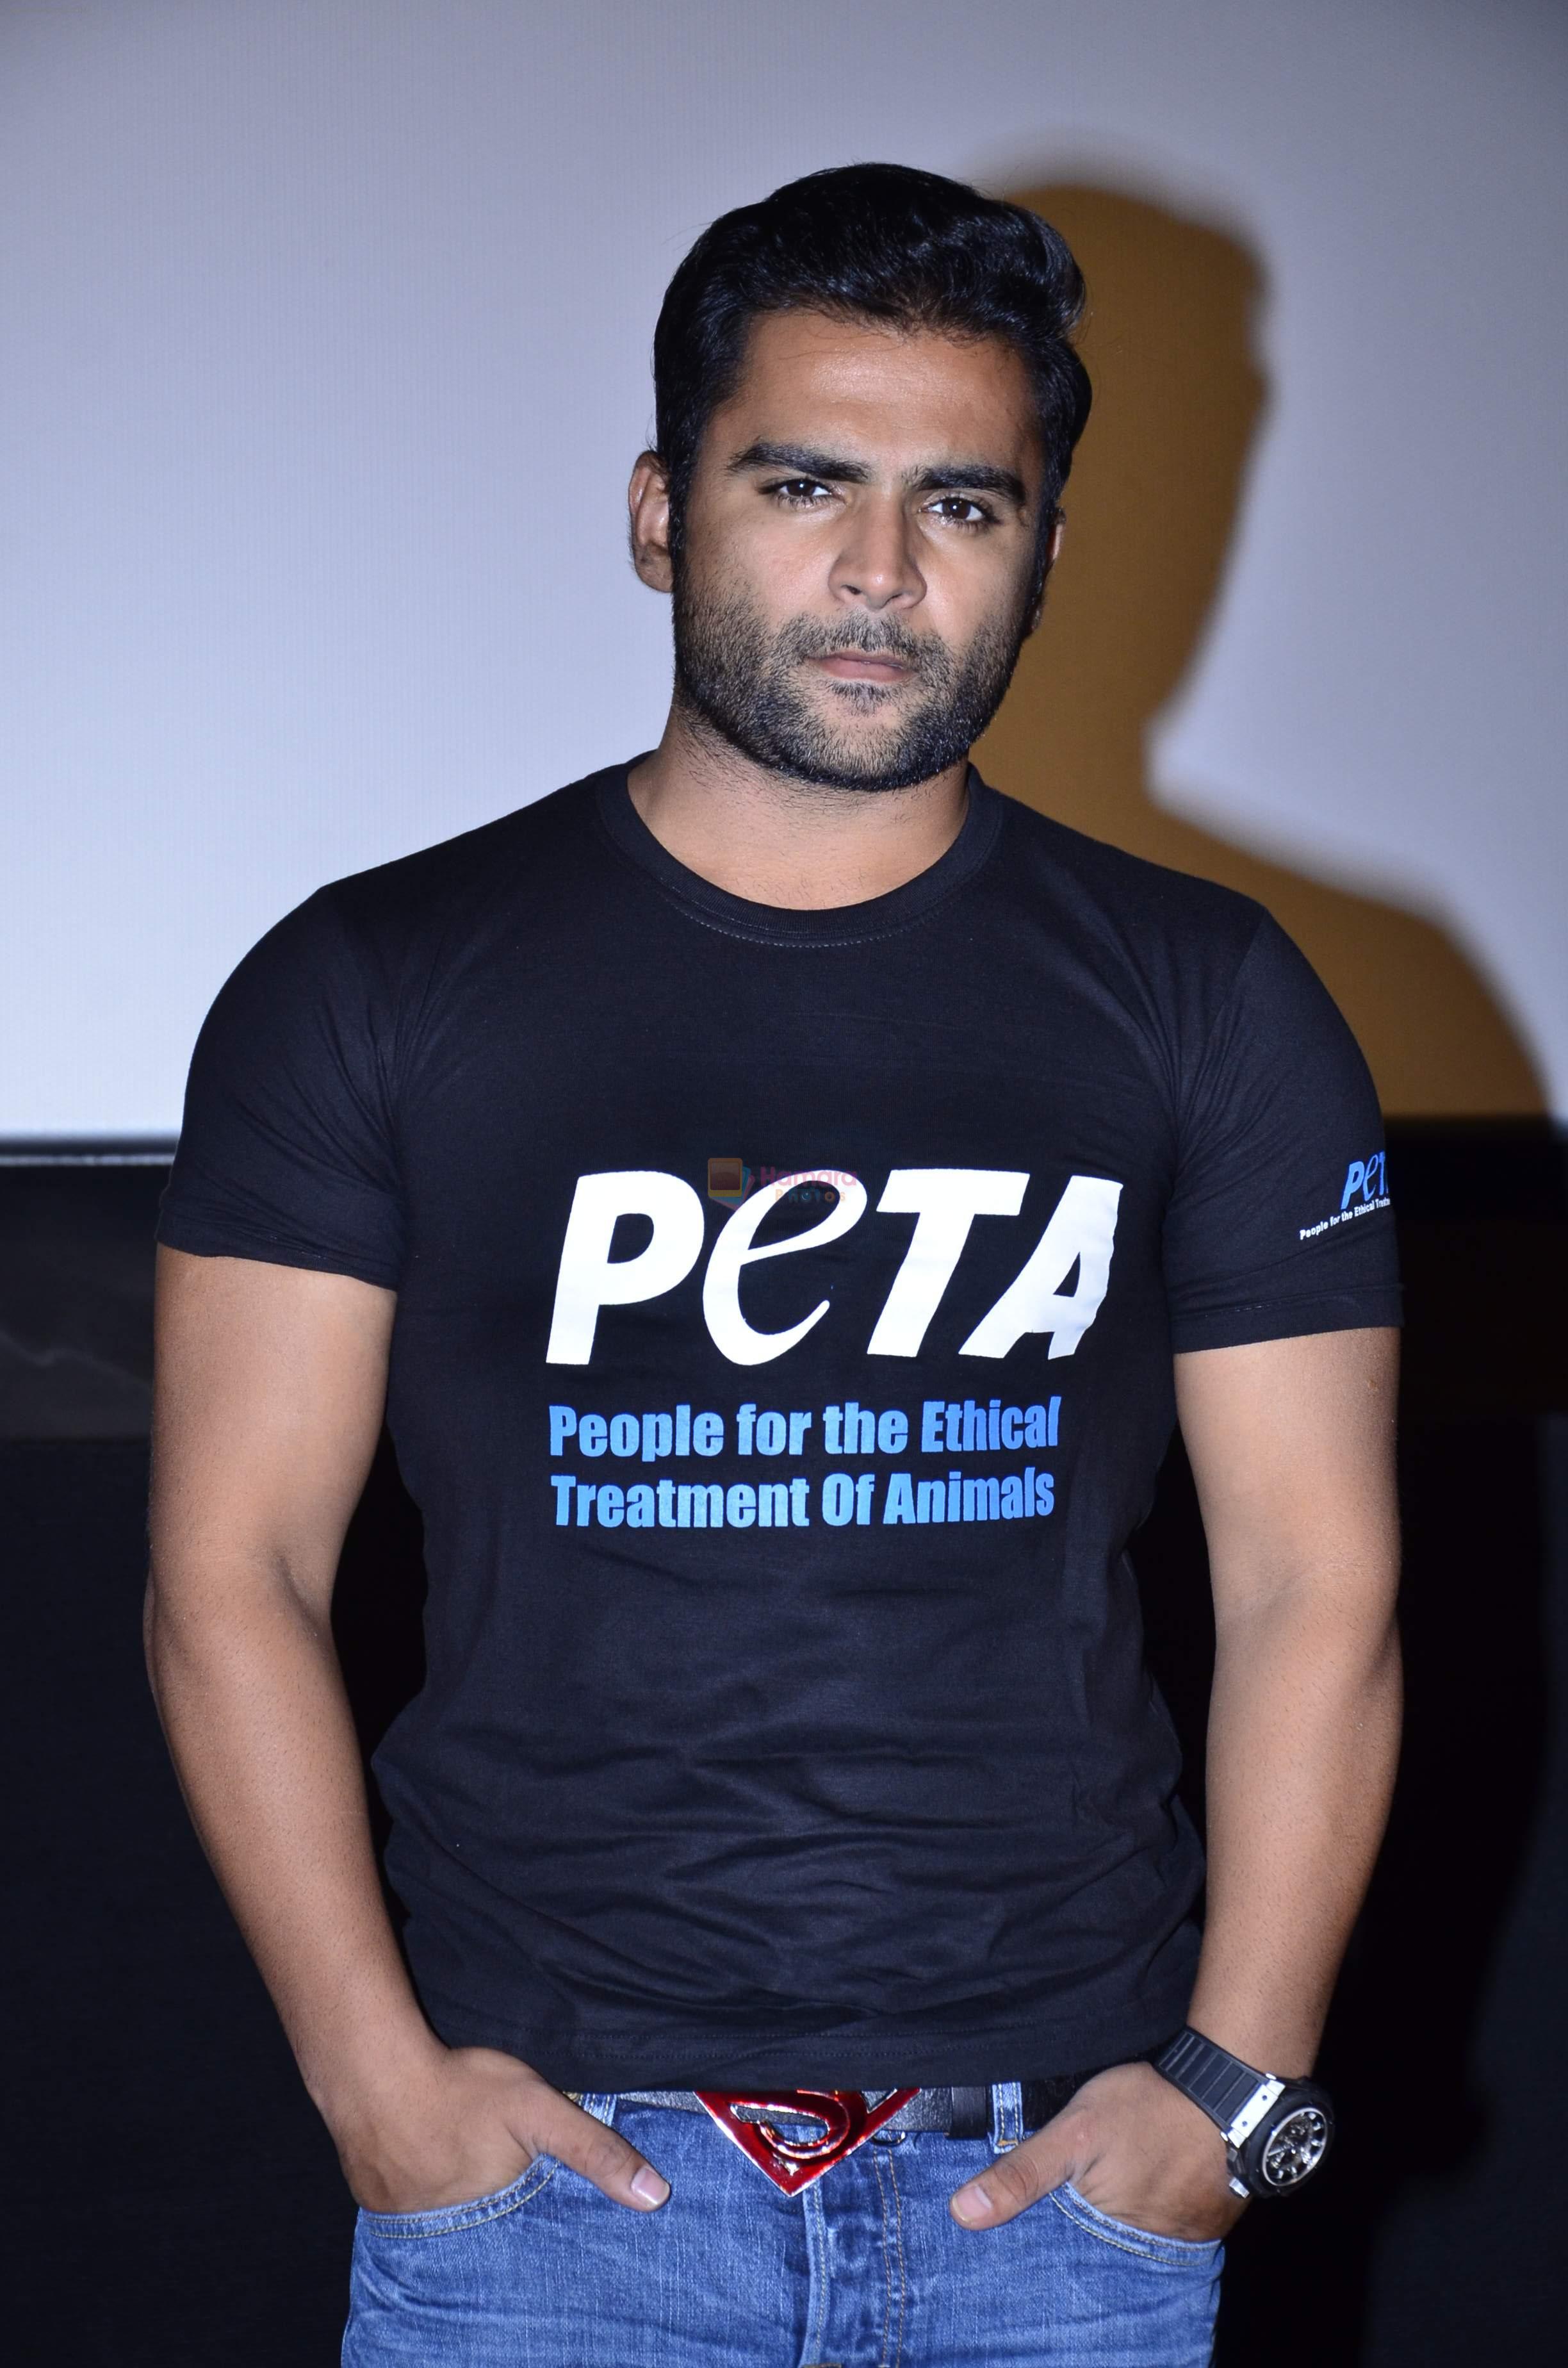 Sachin Joshi's peta ad on the occasion of his bday in PVR, Mumbai on 6th Aug 2014